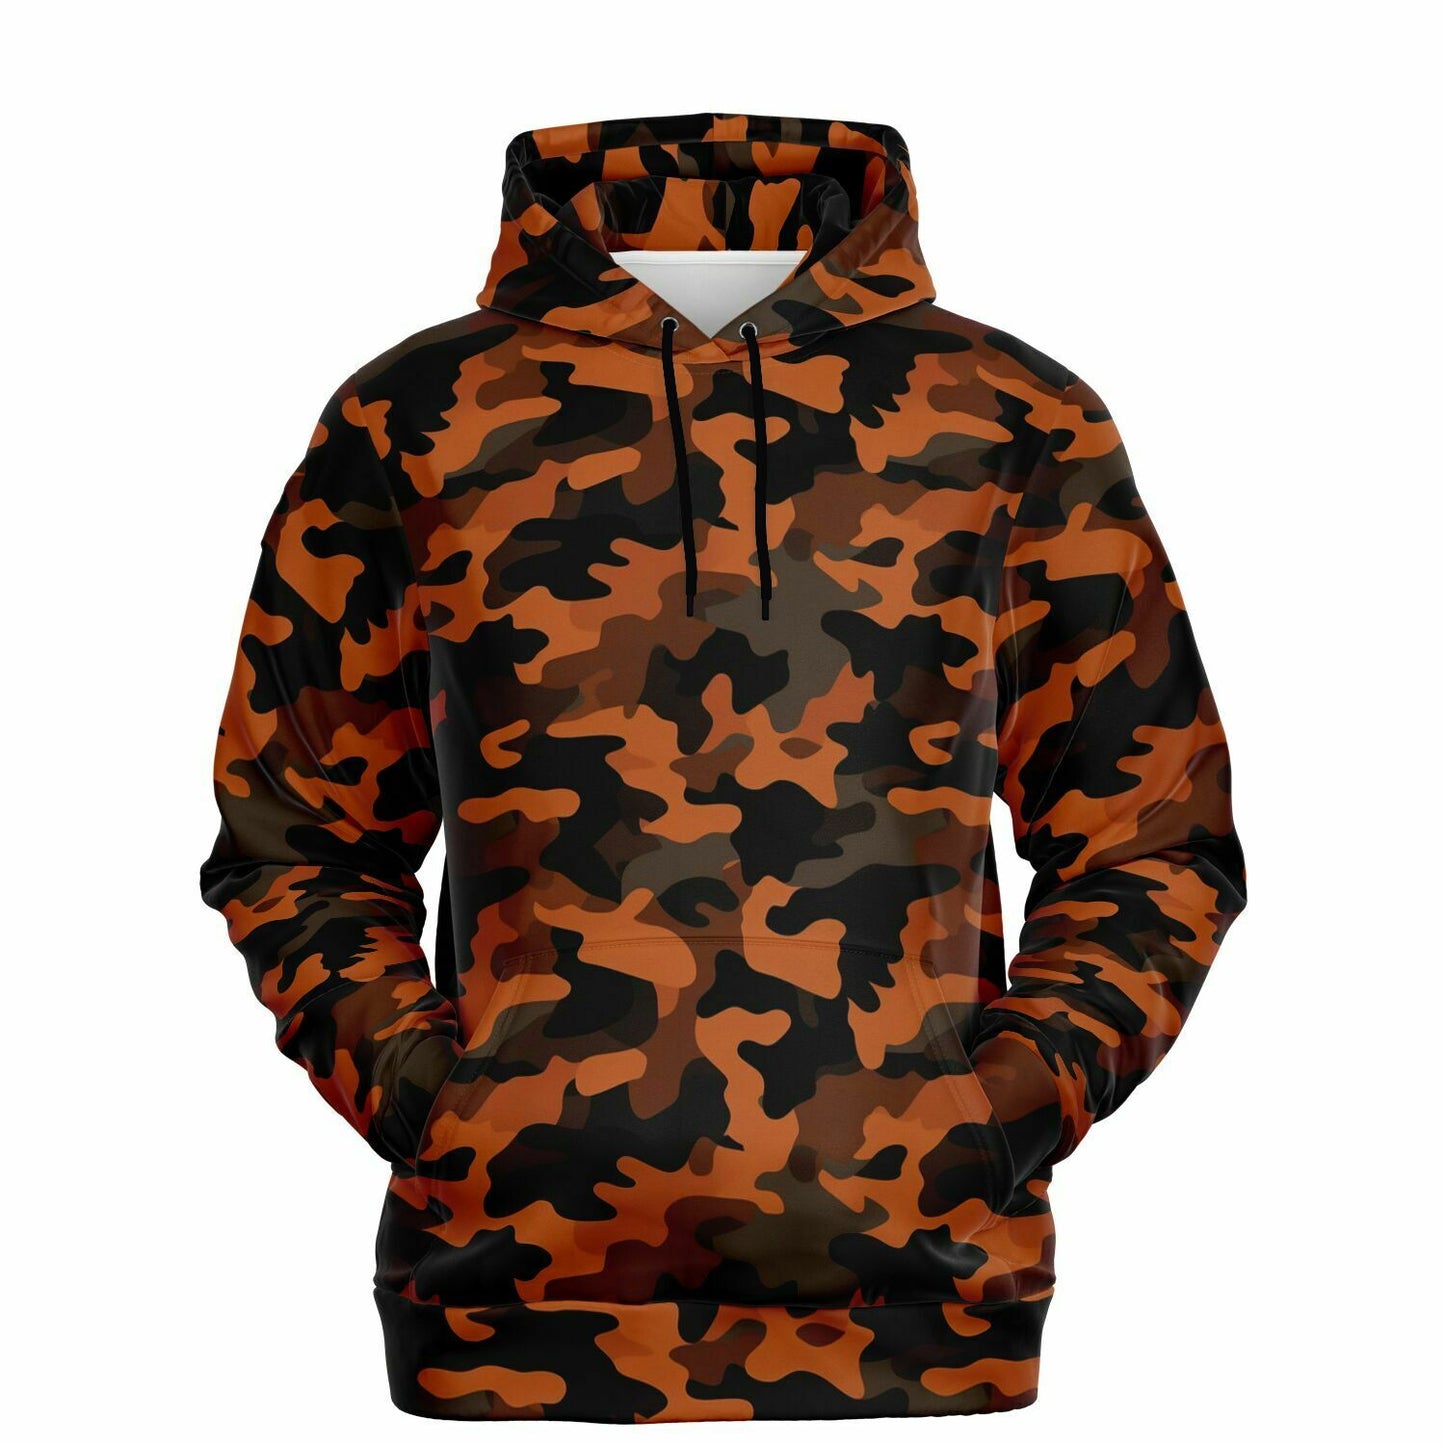 Black and Orange Camo Hoodie, Camouflage Pullover Men Women Adult Aesthetic Graphic Cotton Hooded Sweatshirt with Pockets Starcove Fashion